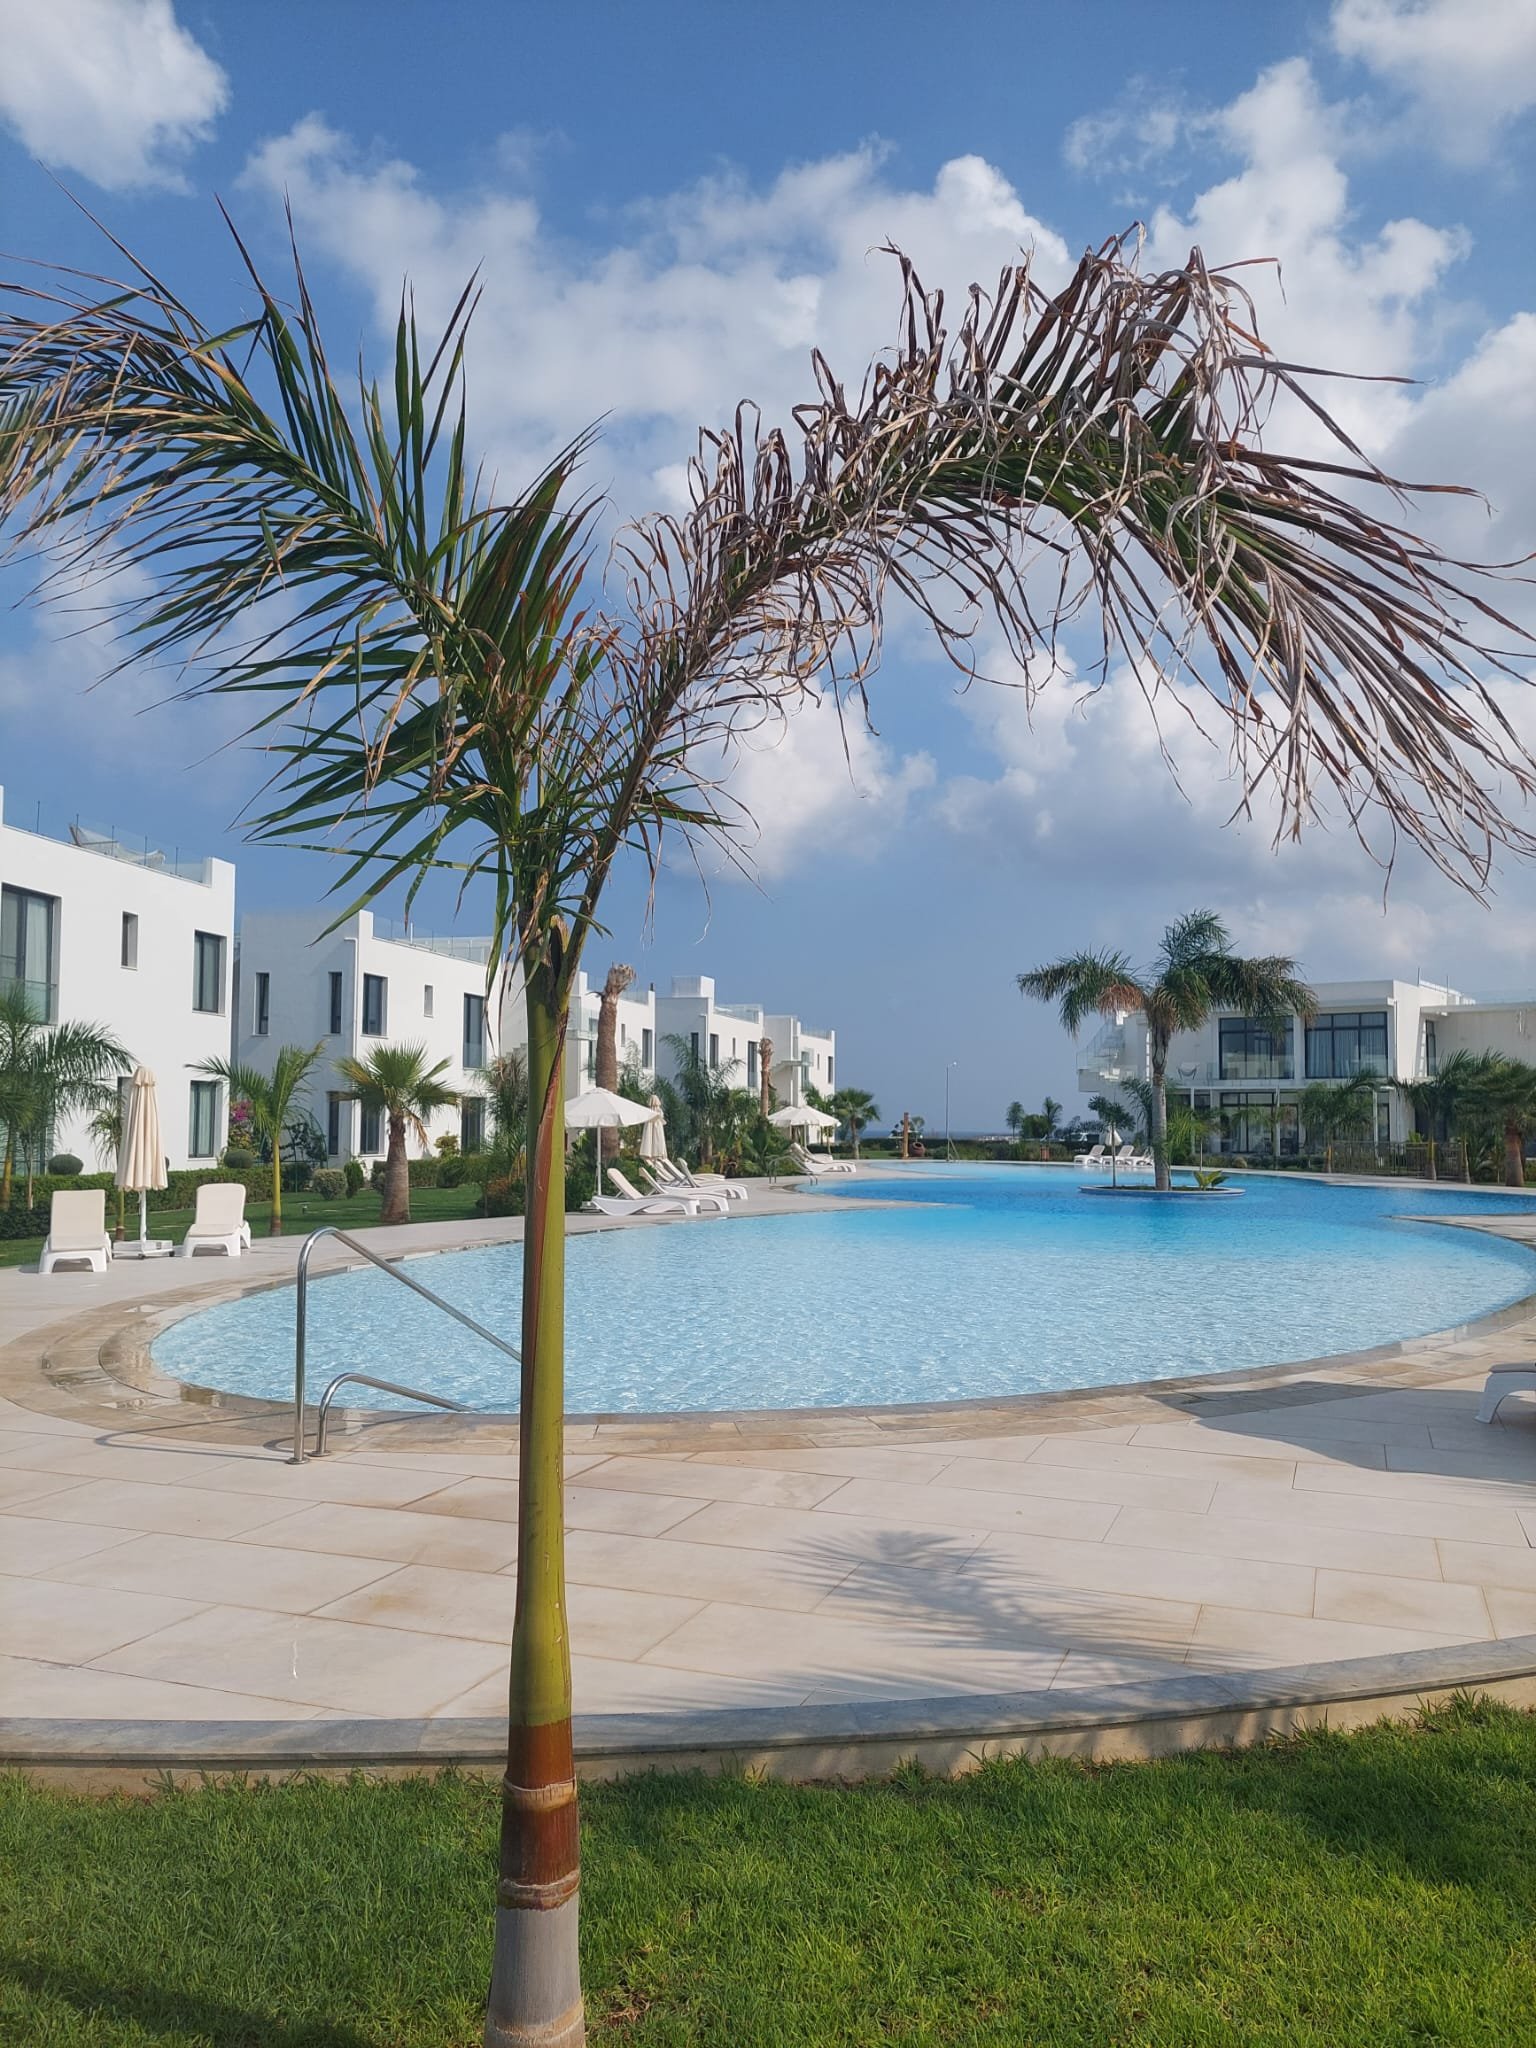 Don't Miss the Holiday Home Opportunity in Esentepede-3374b4d4-3f0d-4627-b874-6786537378c5